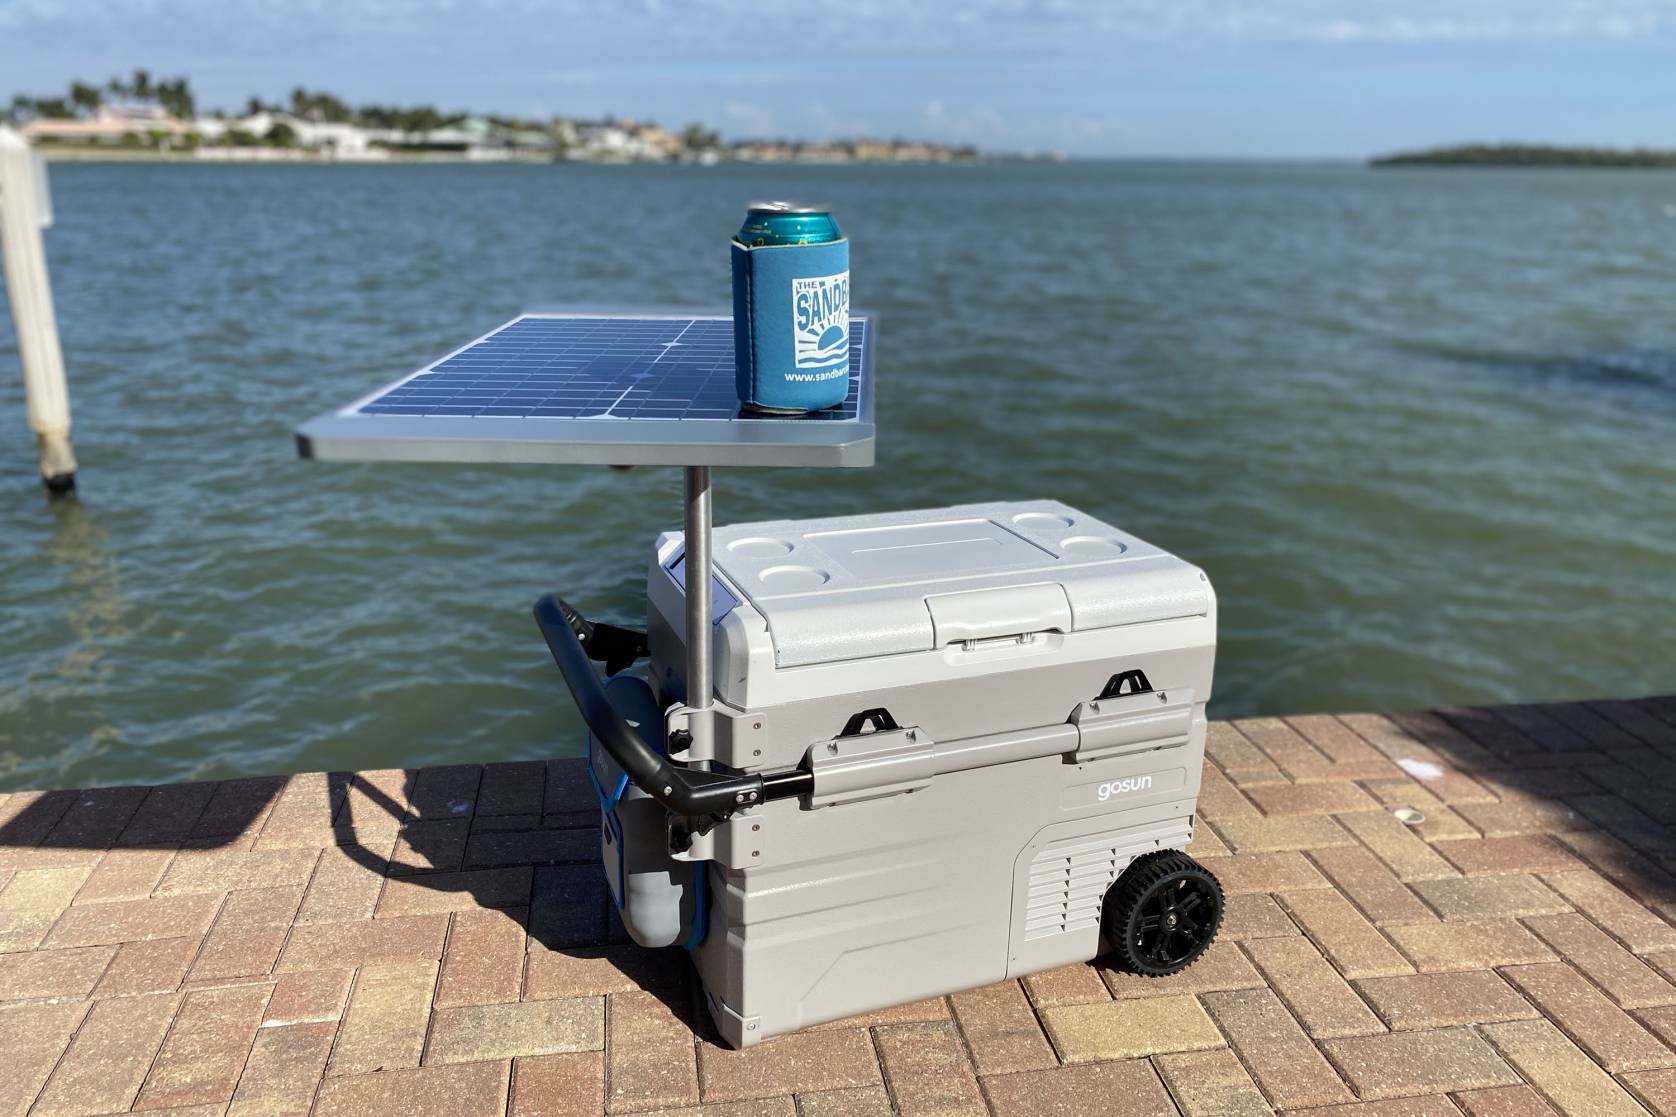 Does The Chillest Hold More Beer Than Any Other Cooler?